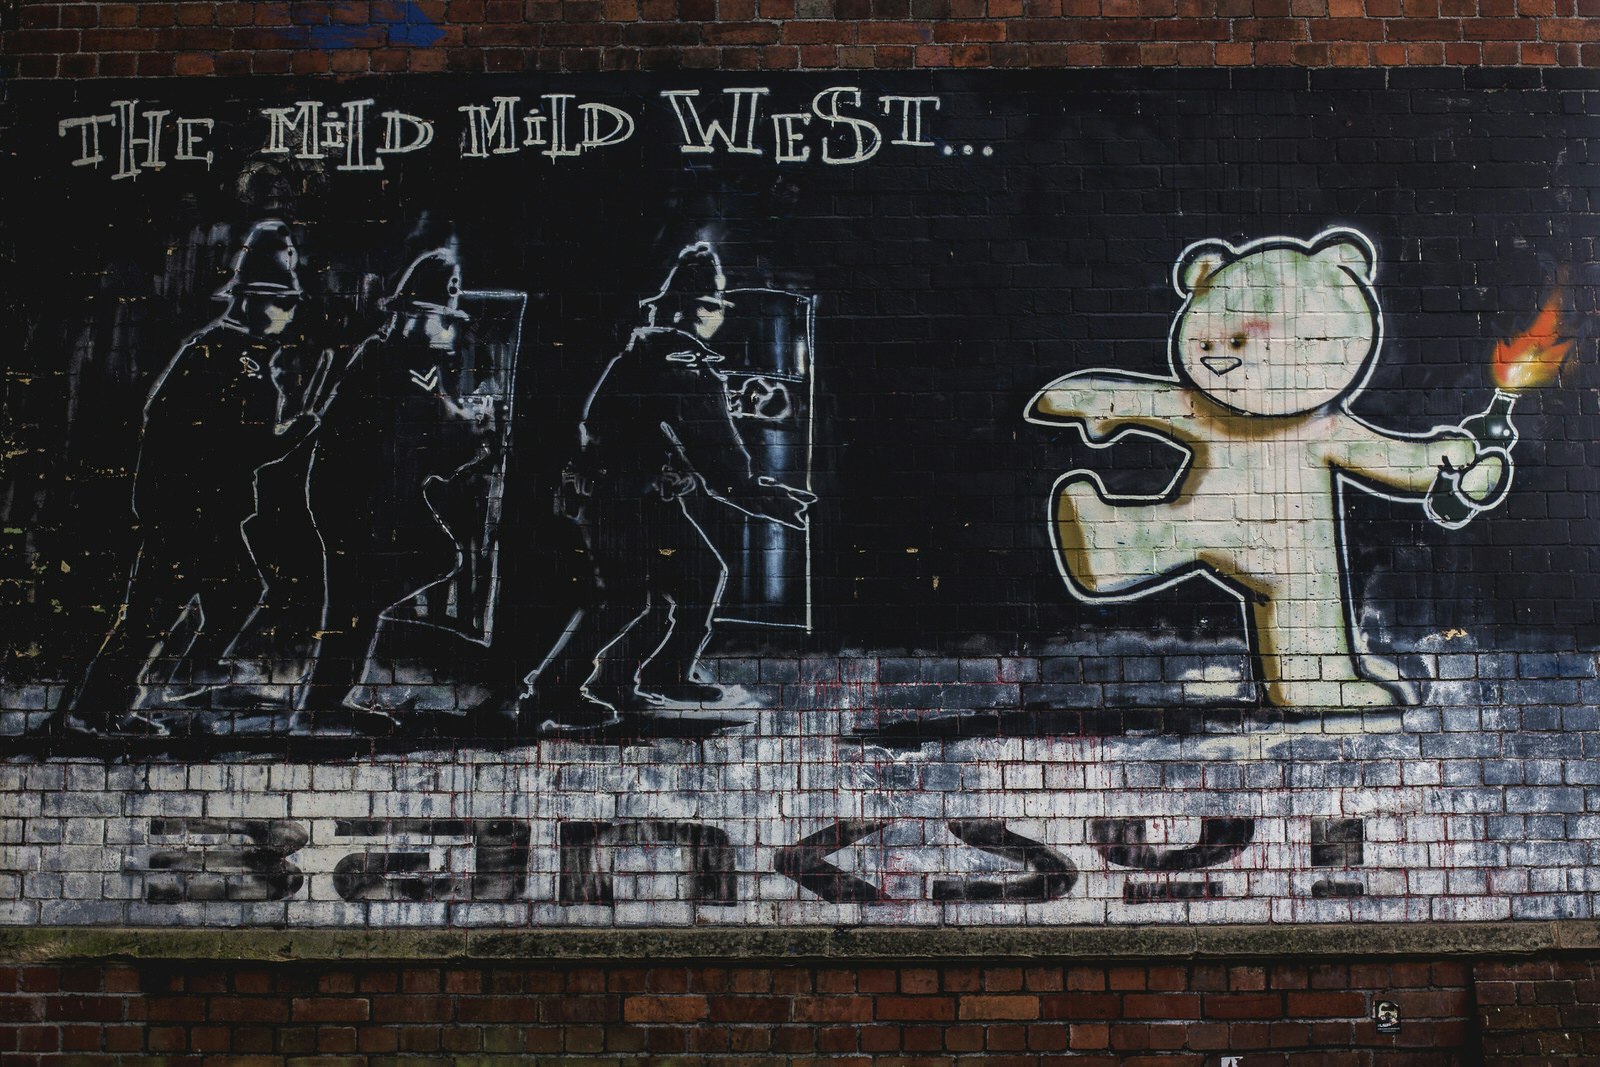 Banksy's 'Mild Mild West' mural in Bristol showing a cartoon bear throwing a petrol bomb at three riot police